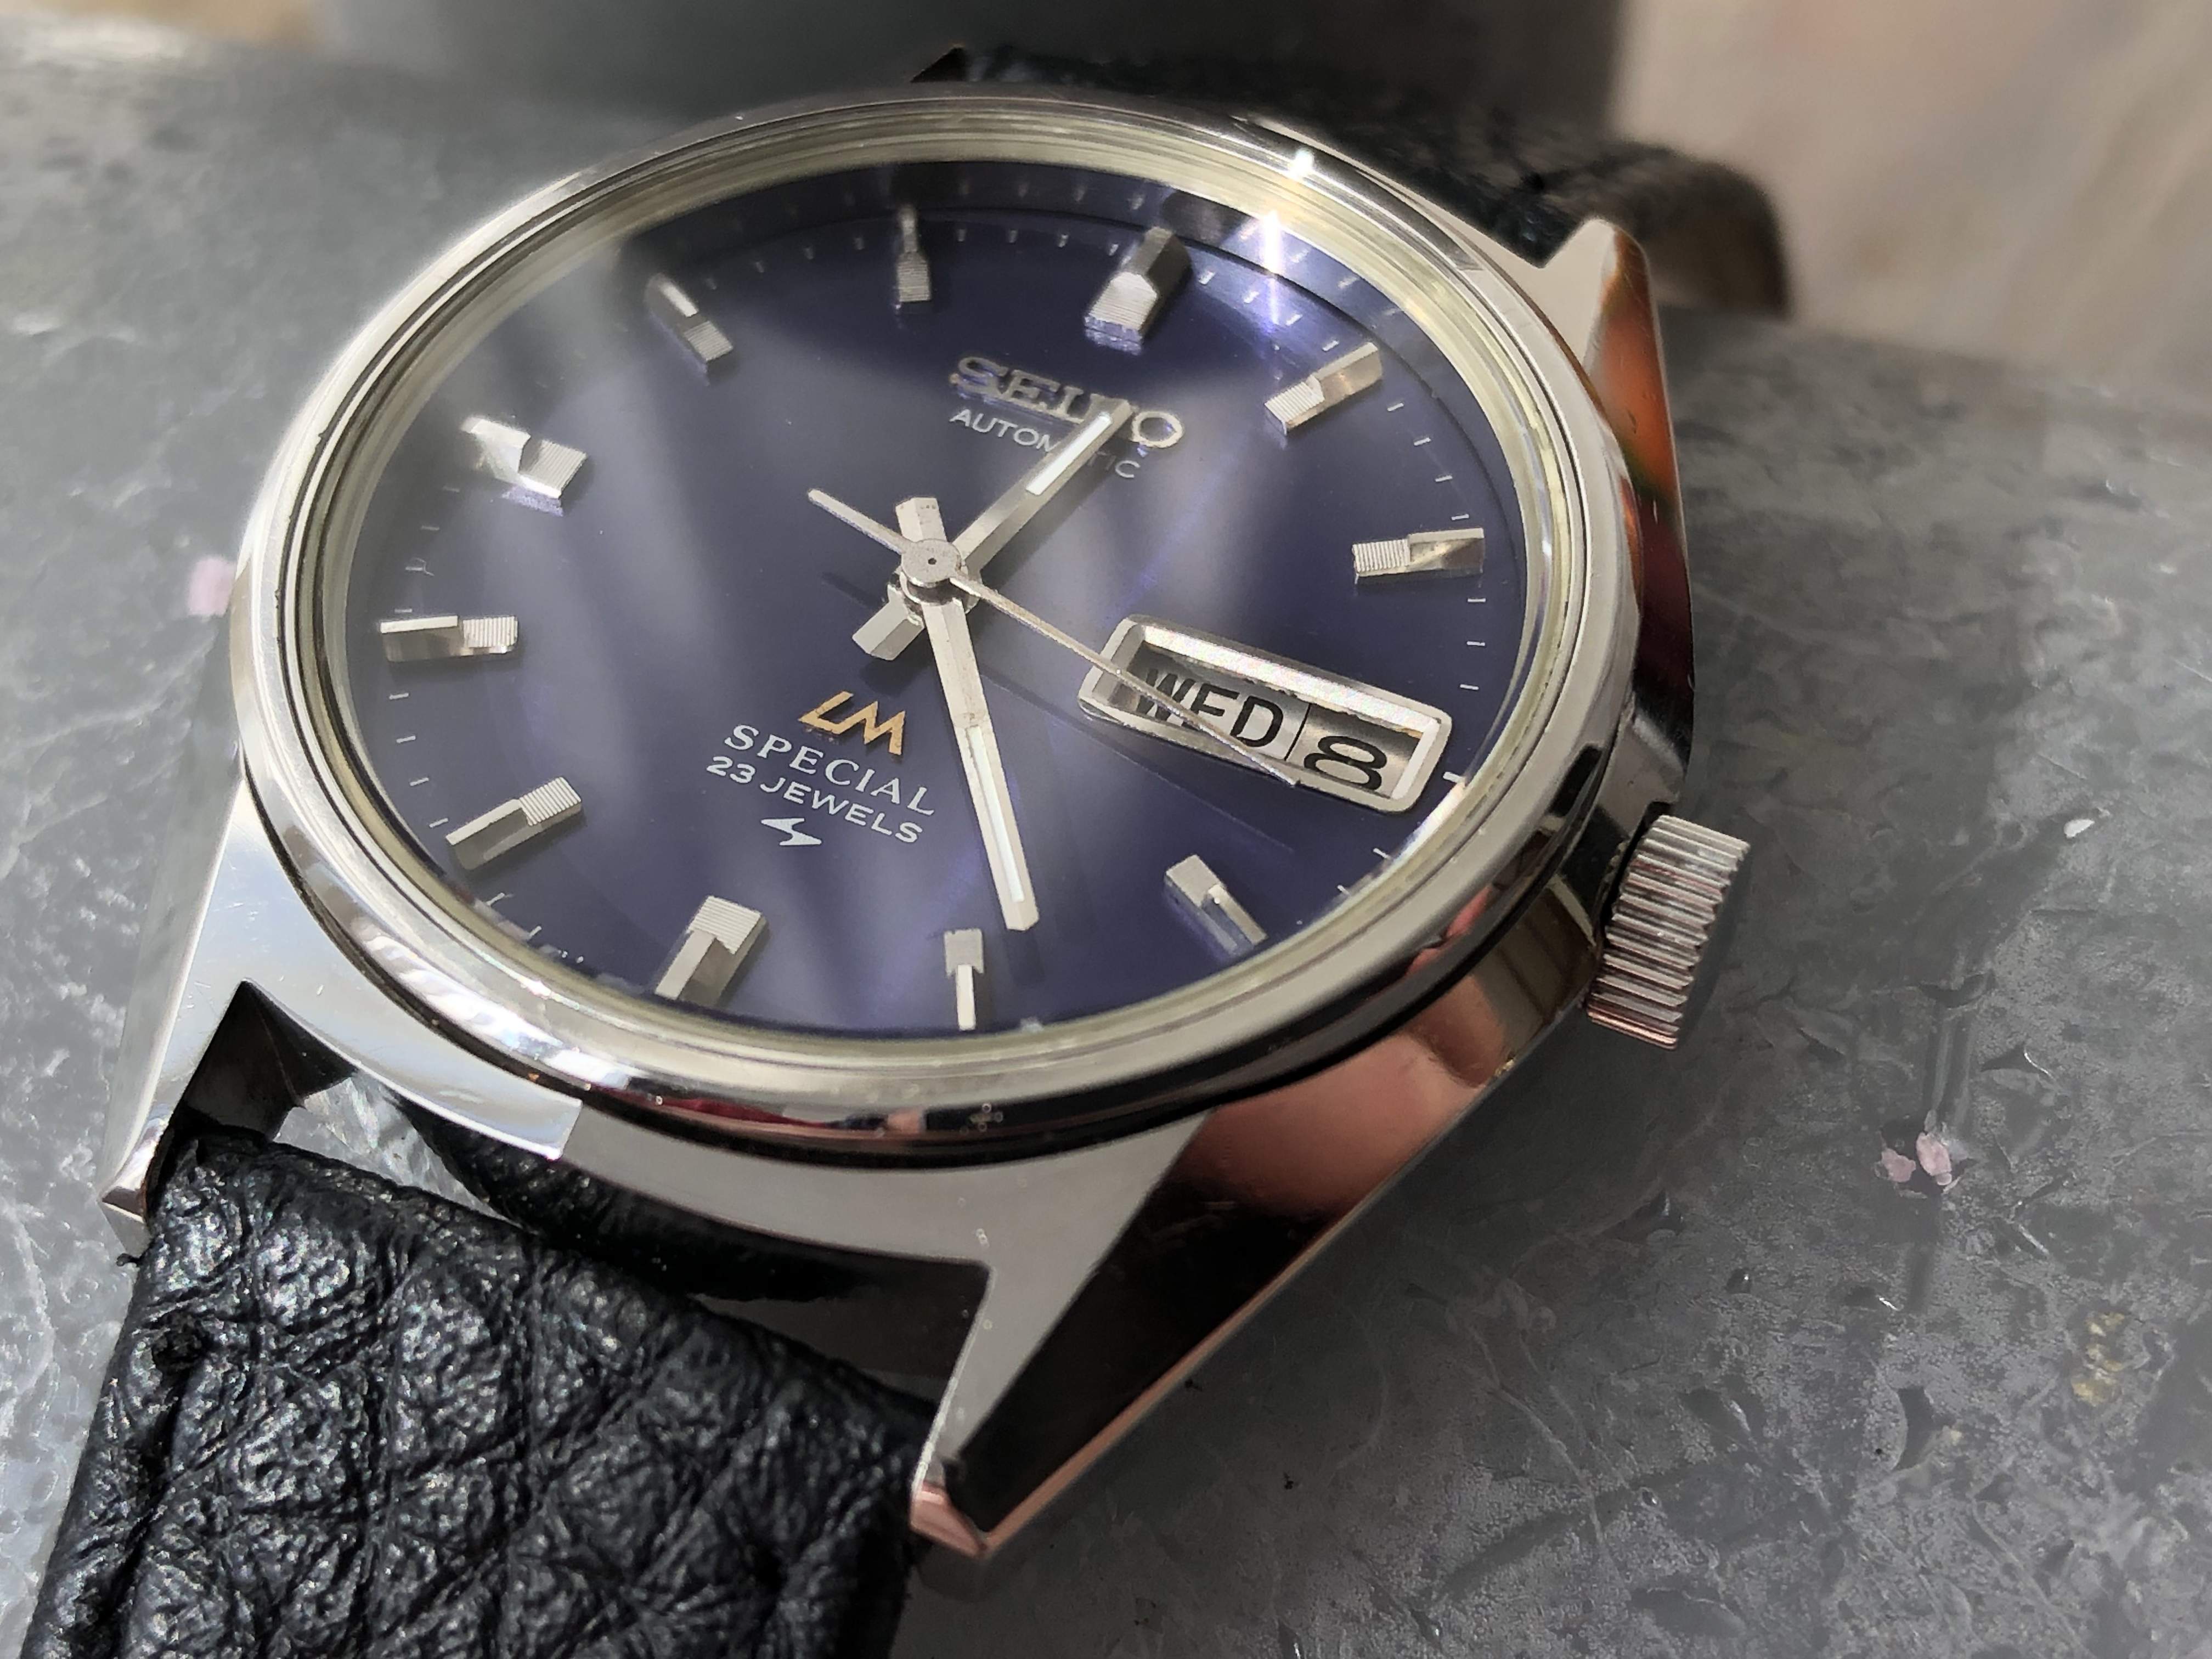 Seiko Lord-Matic Special 5216-7080 (Sold)